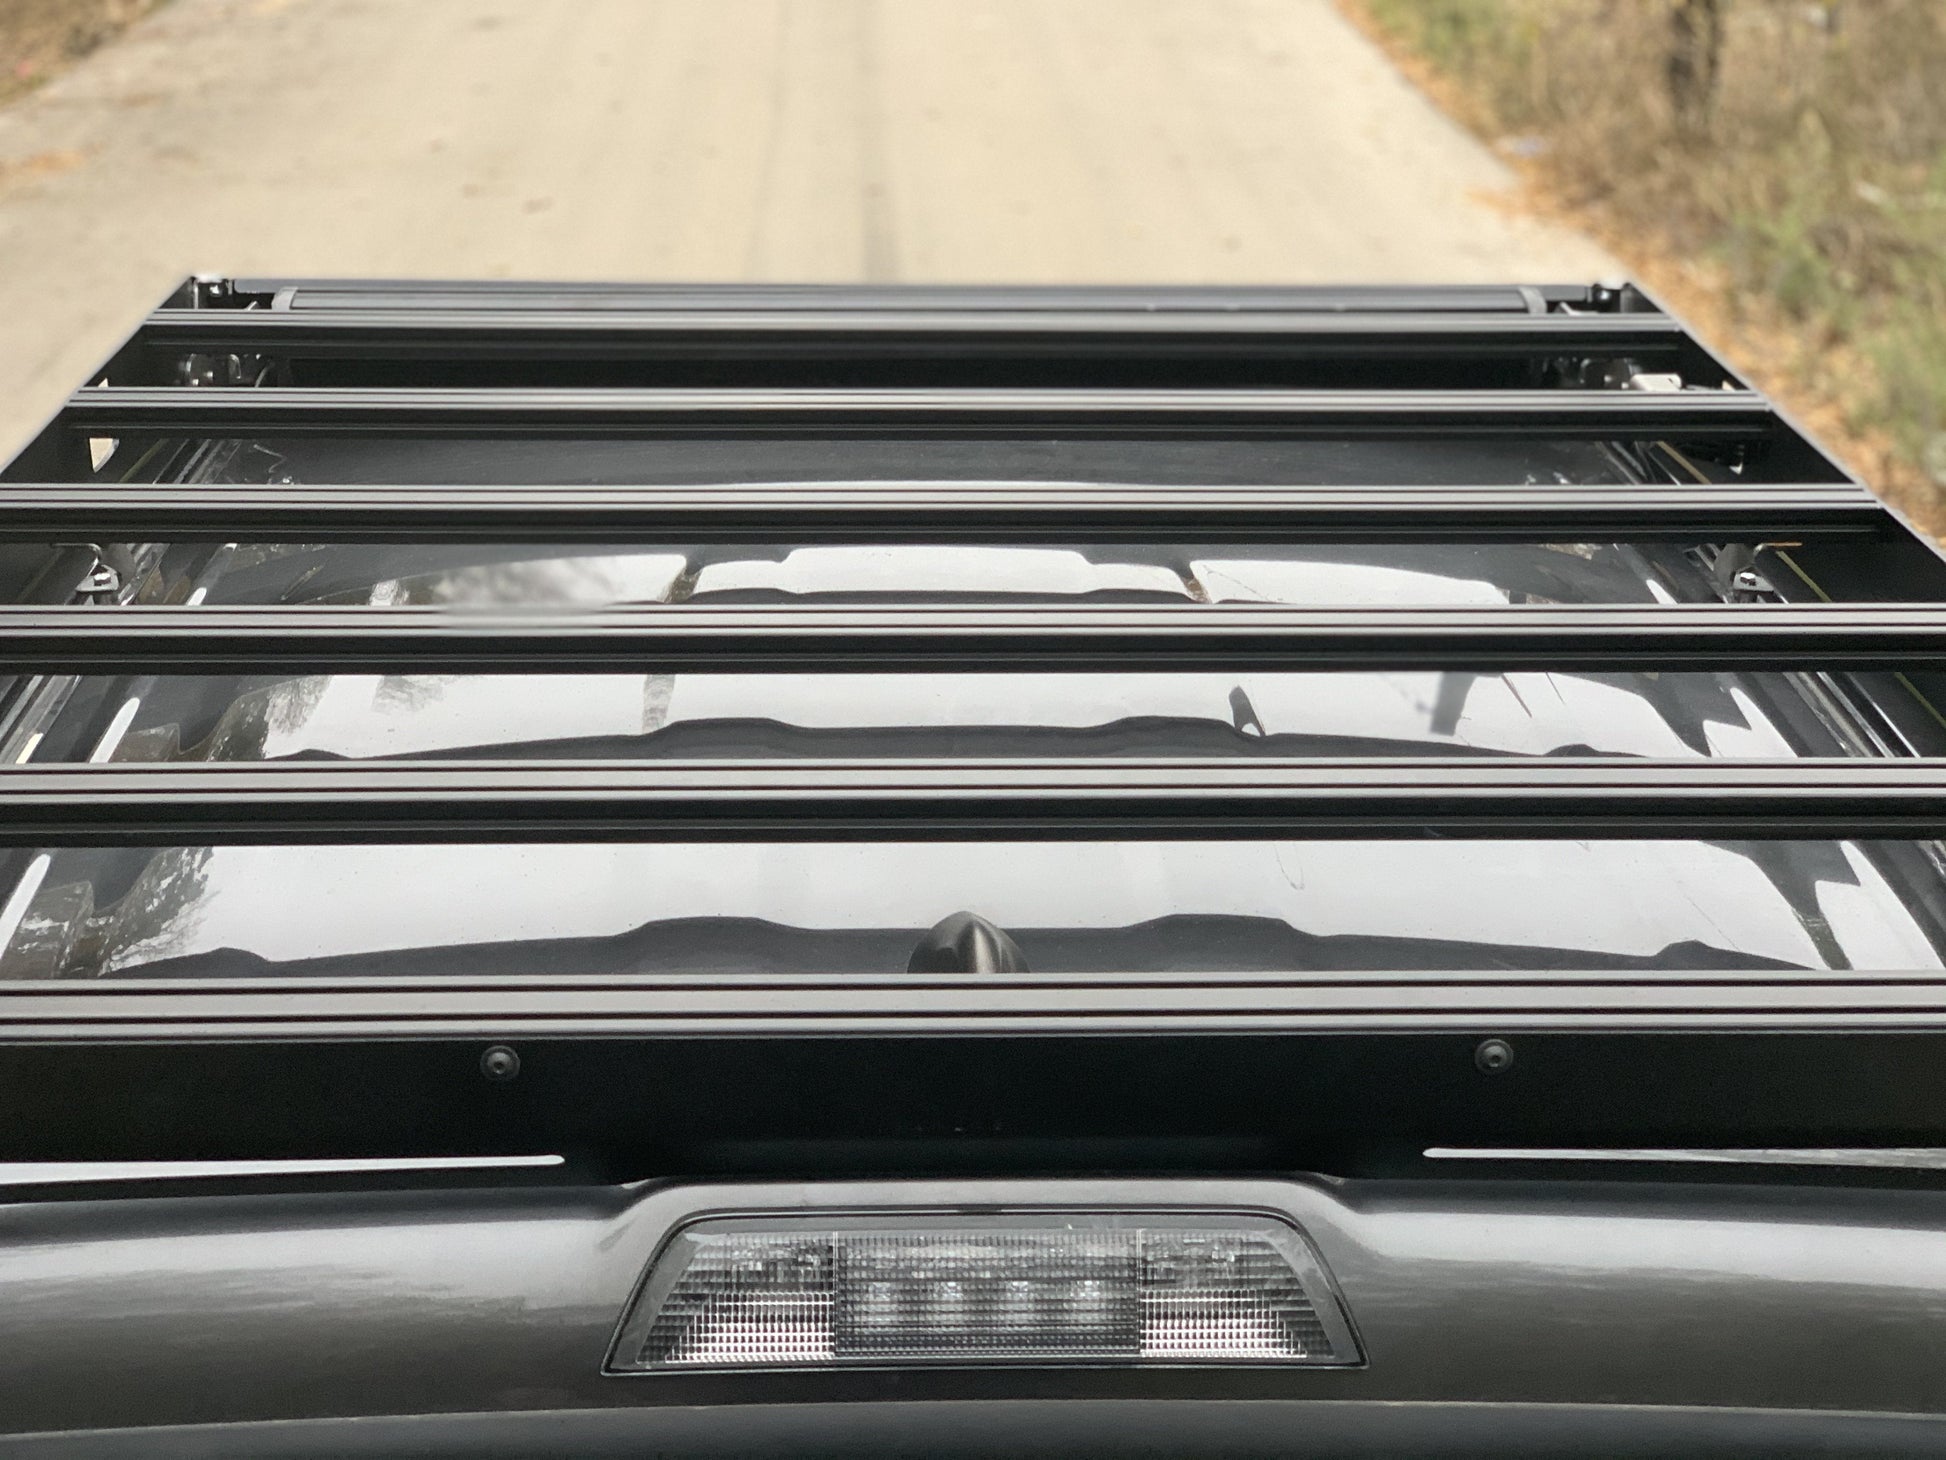 Top down rear view of gray Toyota Tacoma with Premium roof rack - Cali Raised LED